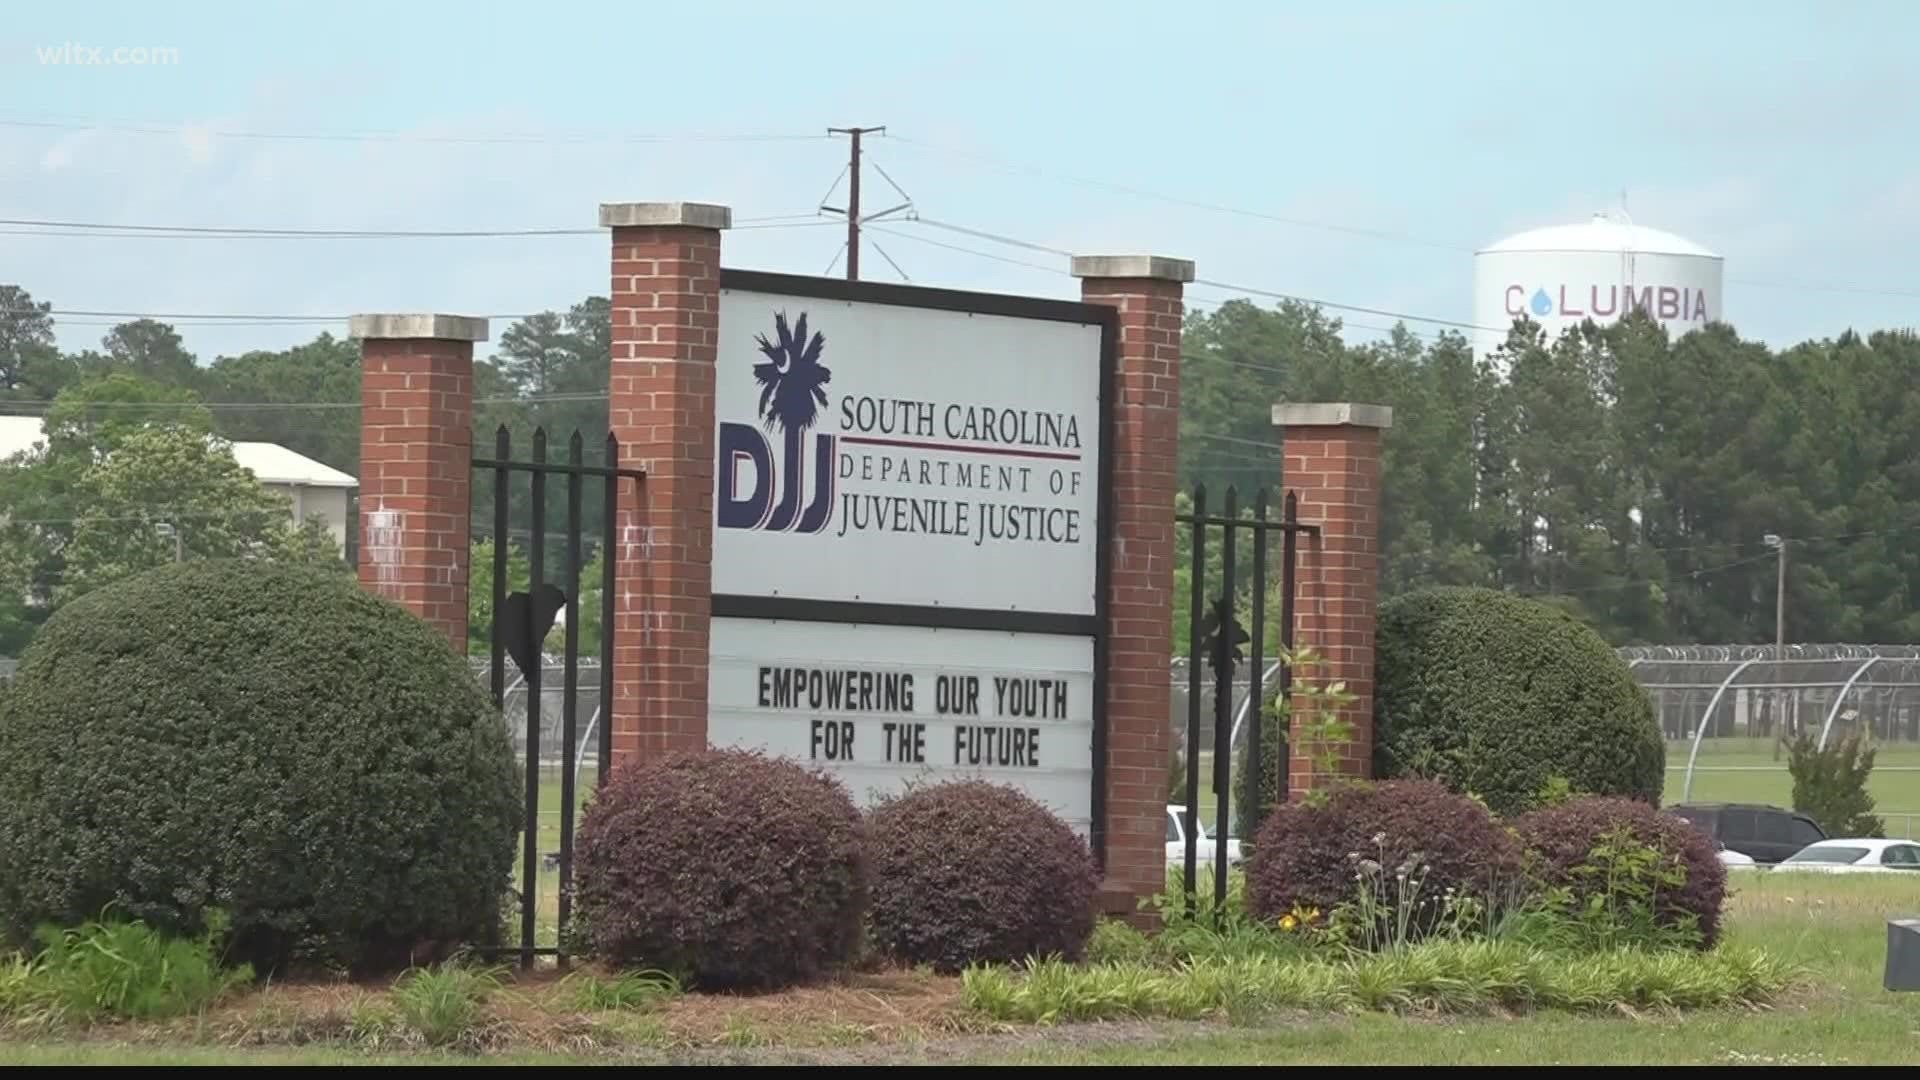 The four students were transported to the DJJ after threatening the teacher